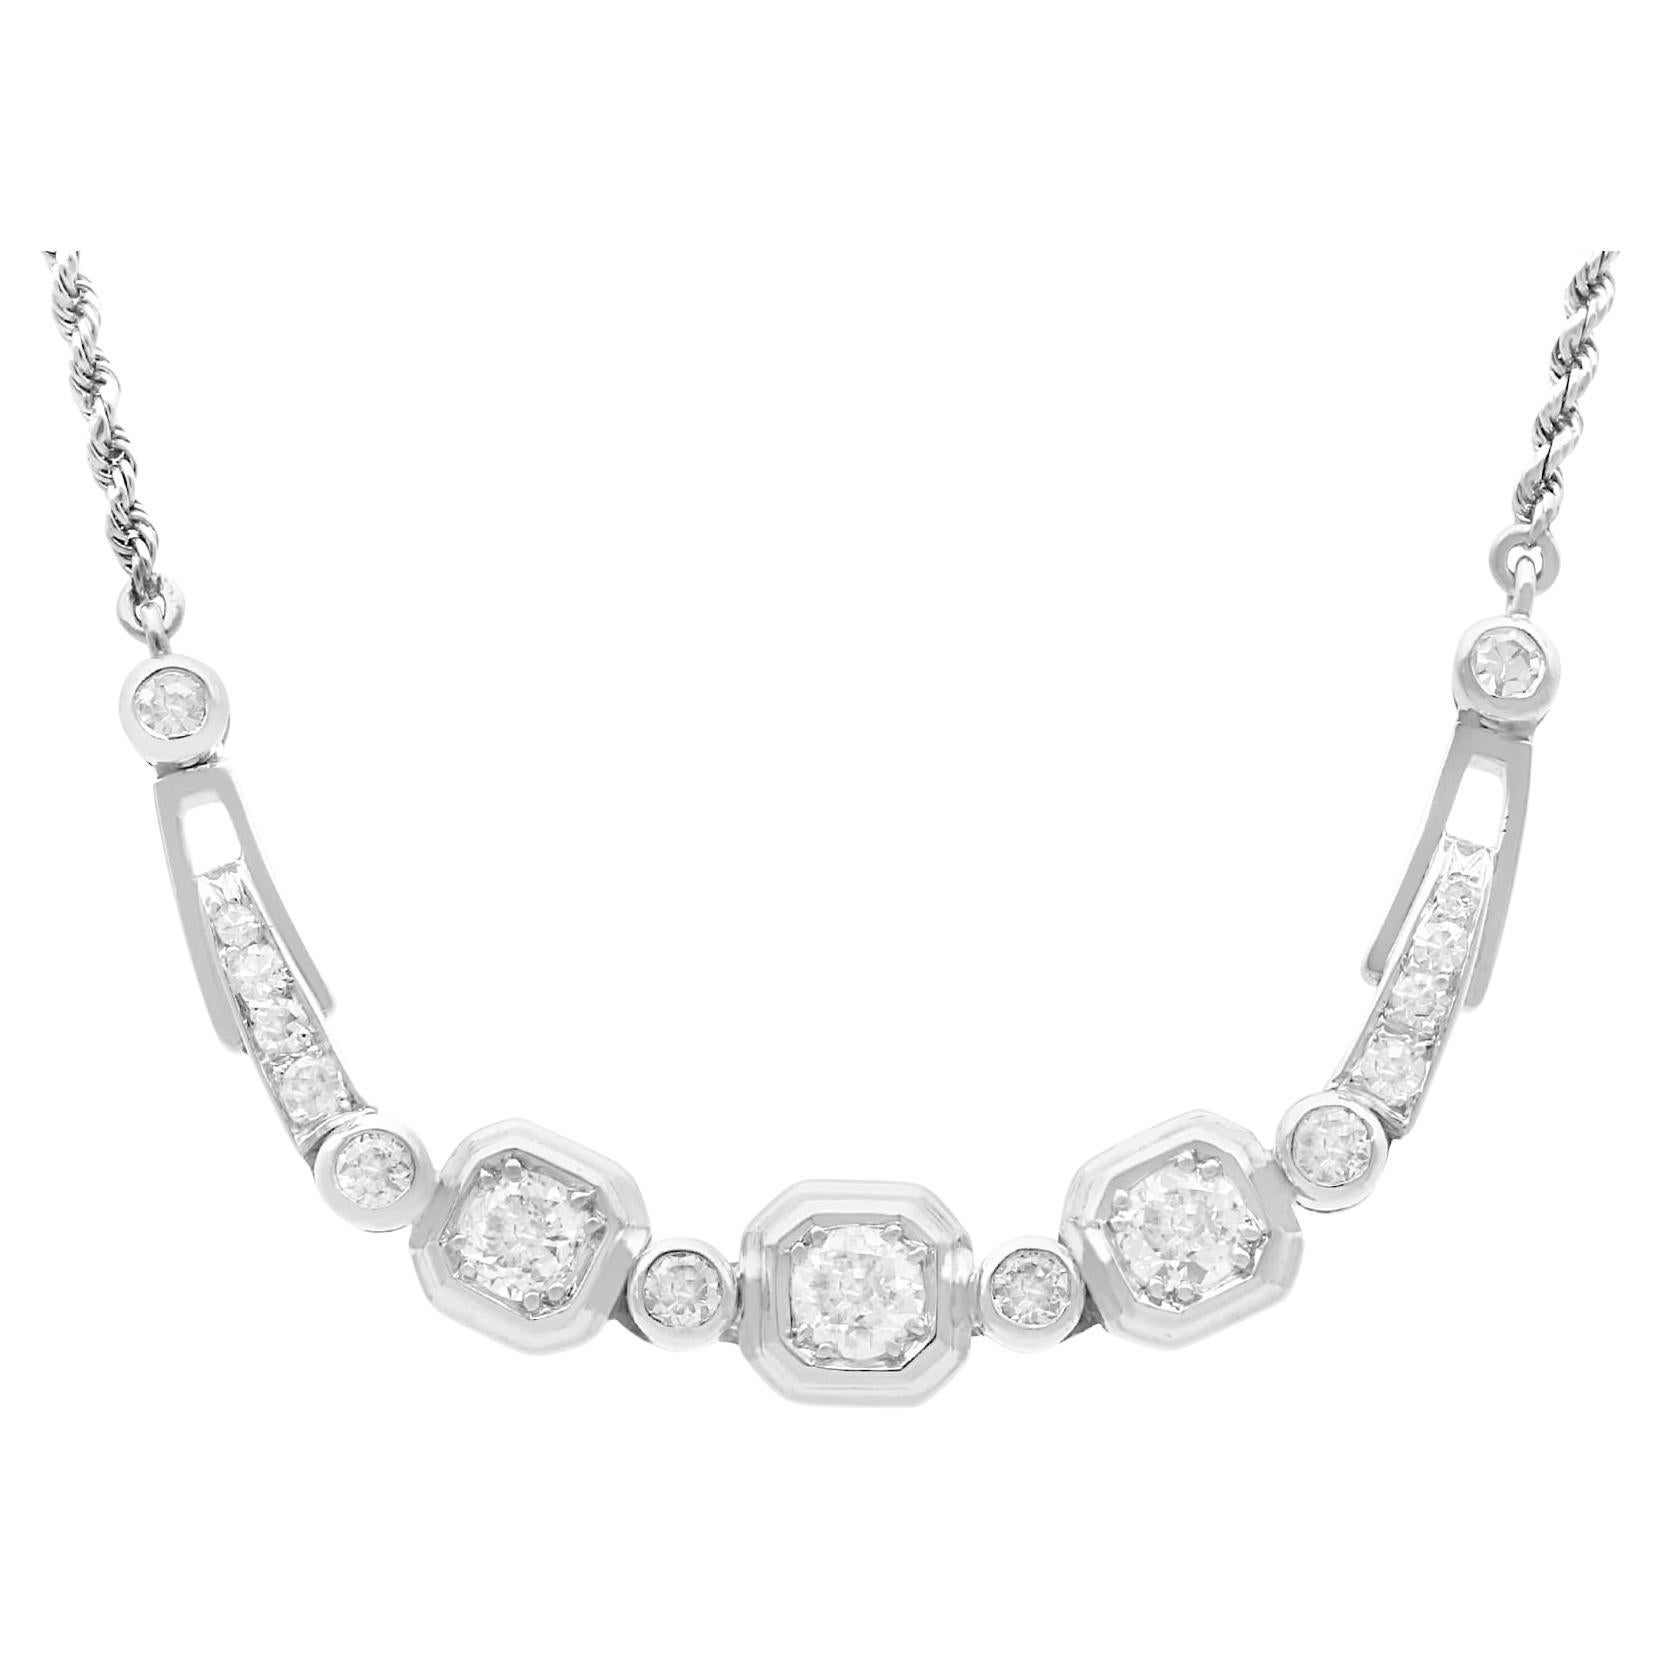 1920s 0.66 Carat Diamond and 18k White Gold Necklace For Sale